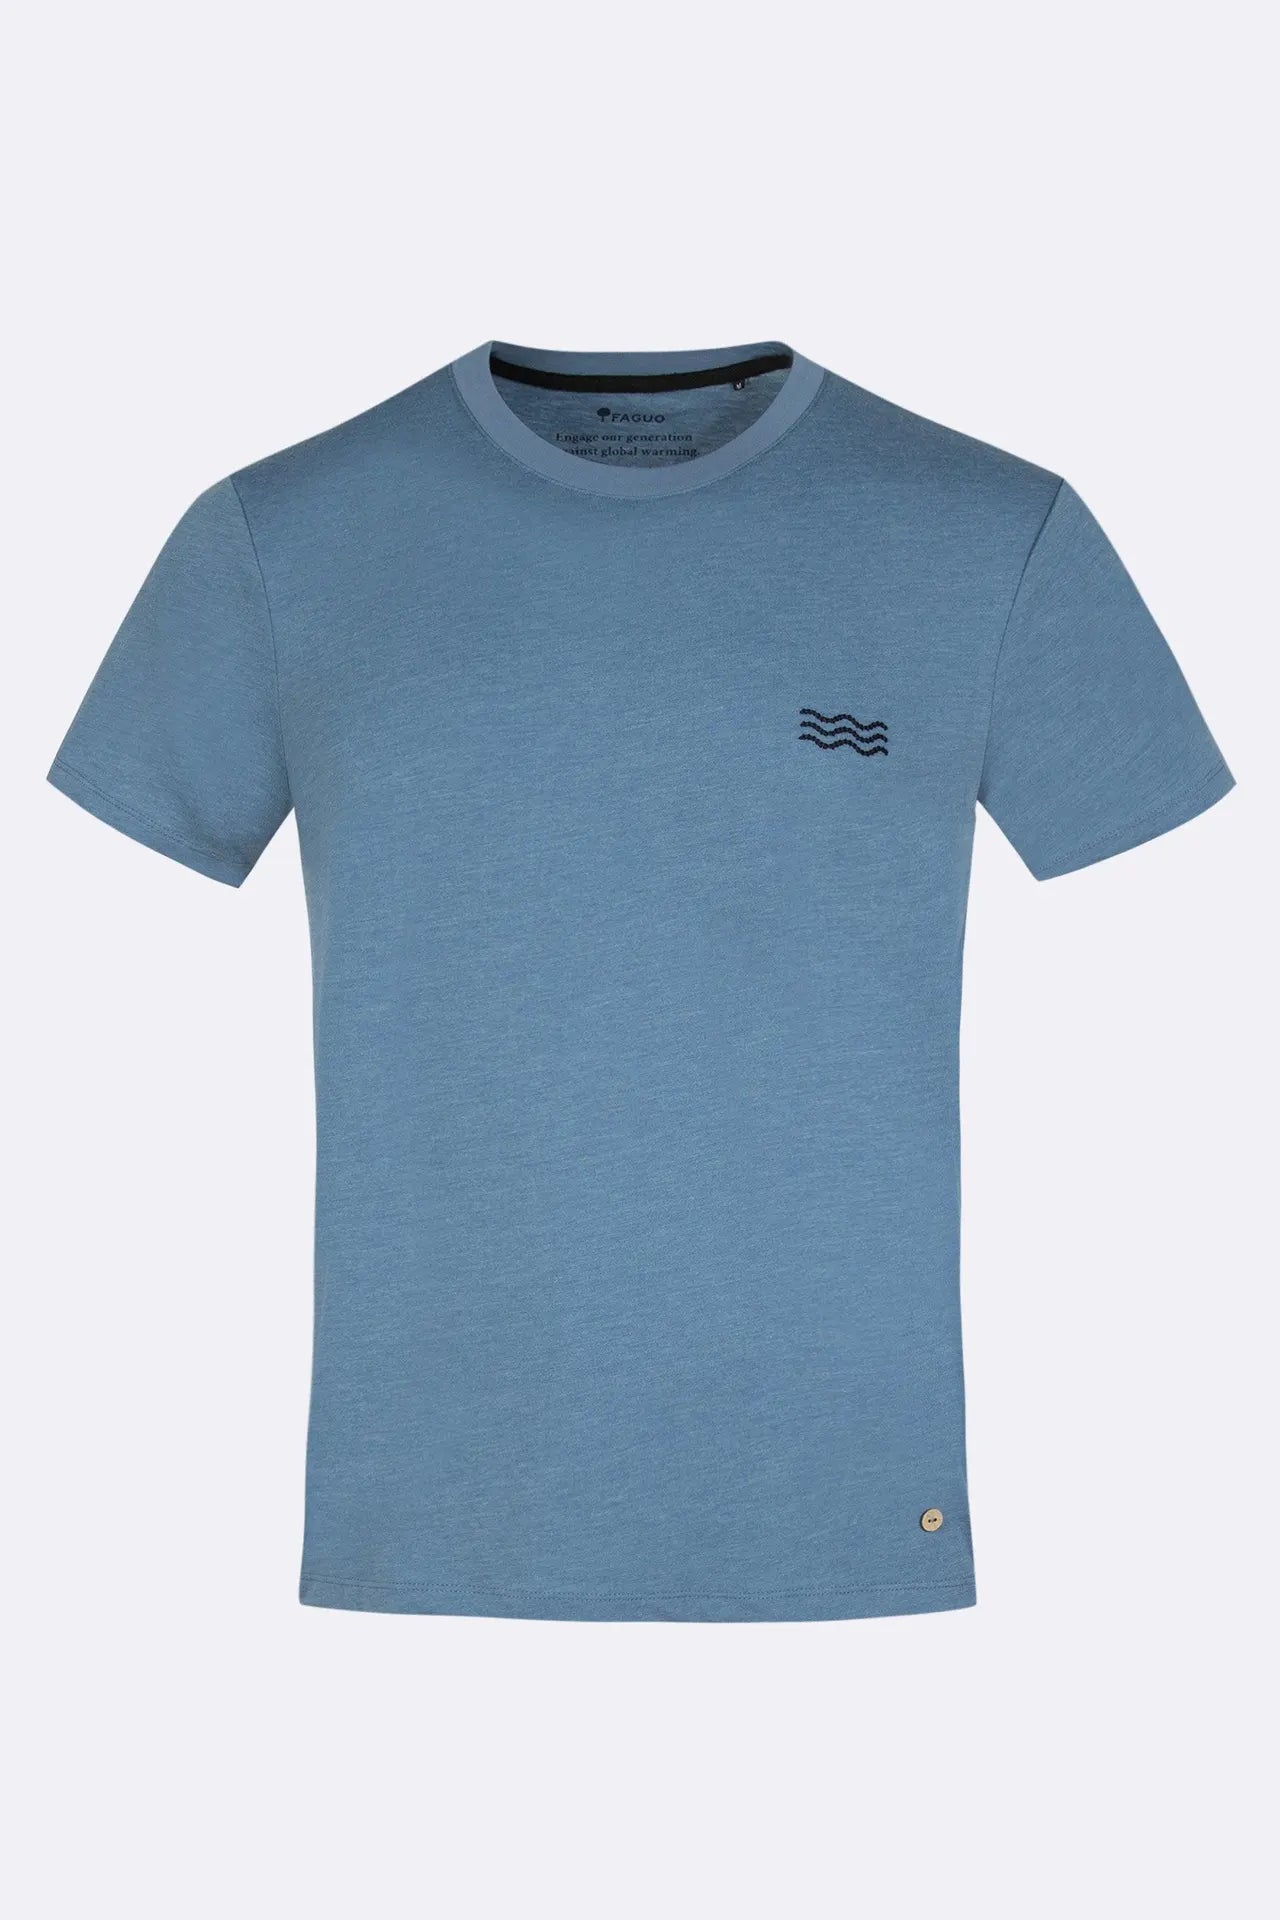 Arcy Waves - Blue t-shirt in cotton waves - The Good Chic